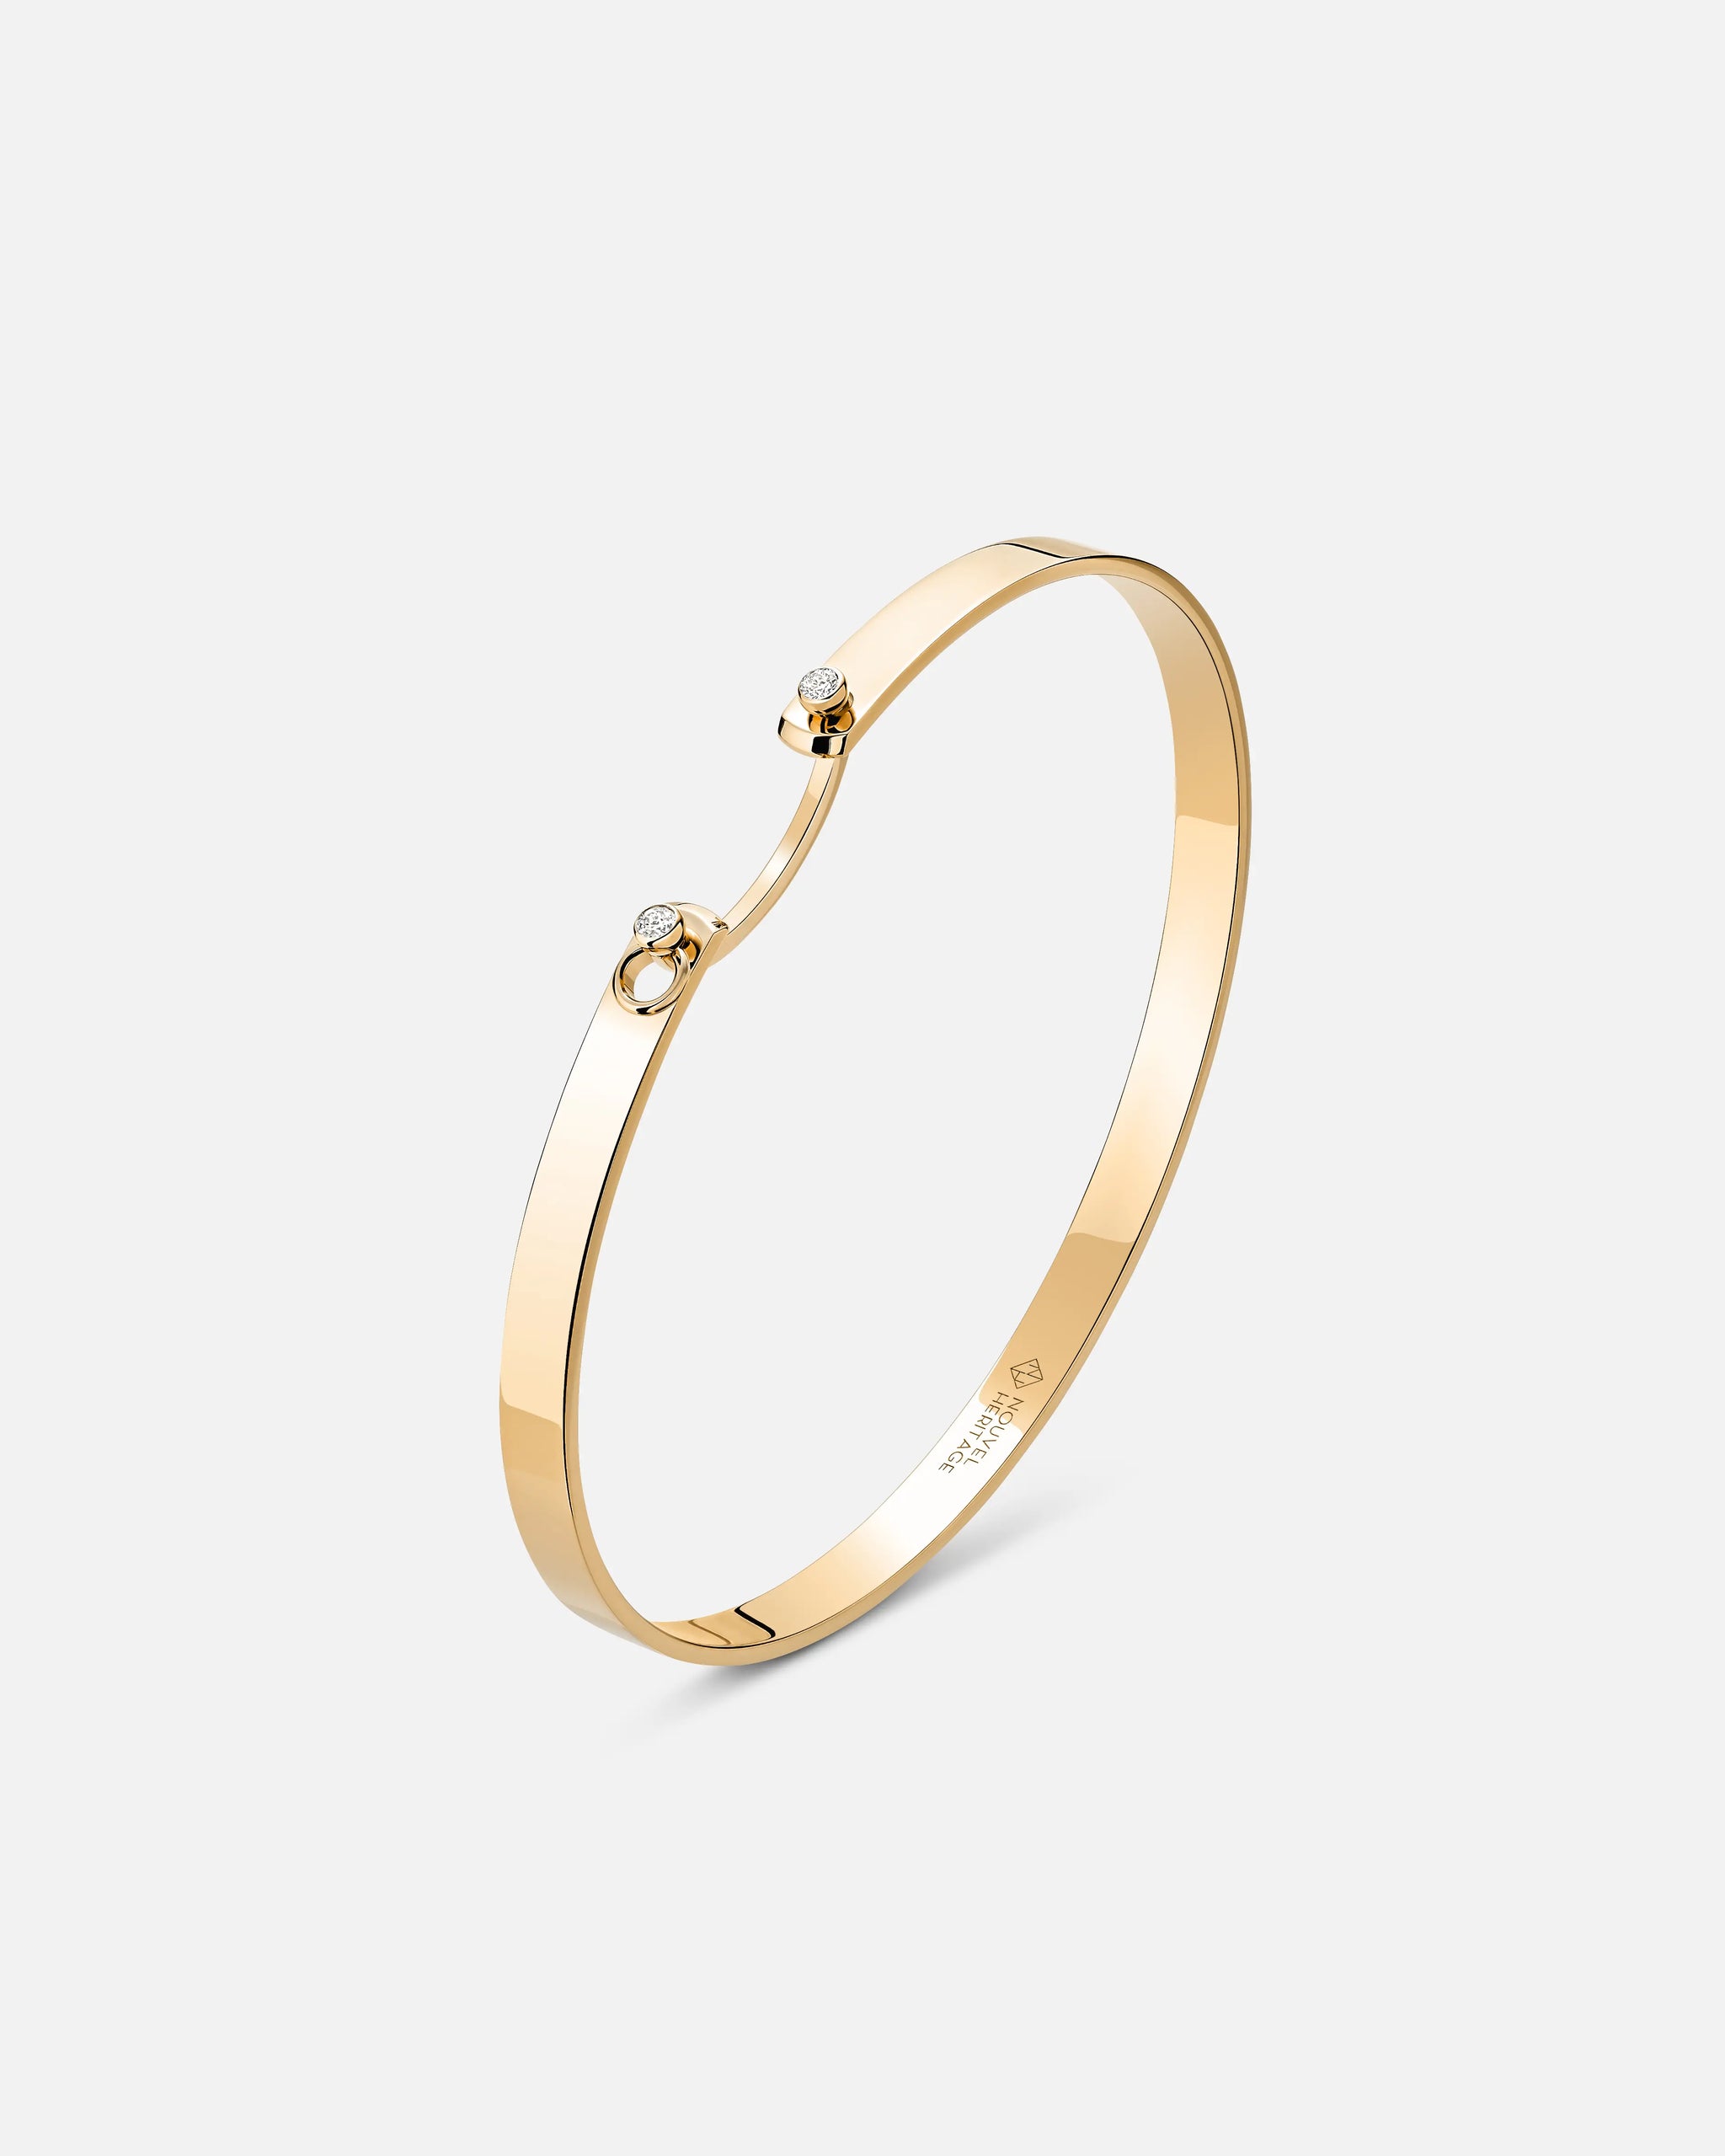 Monday Morning Mood Bangle in Yellow Gold - 1 - Nouvel Heritage